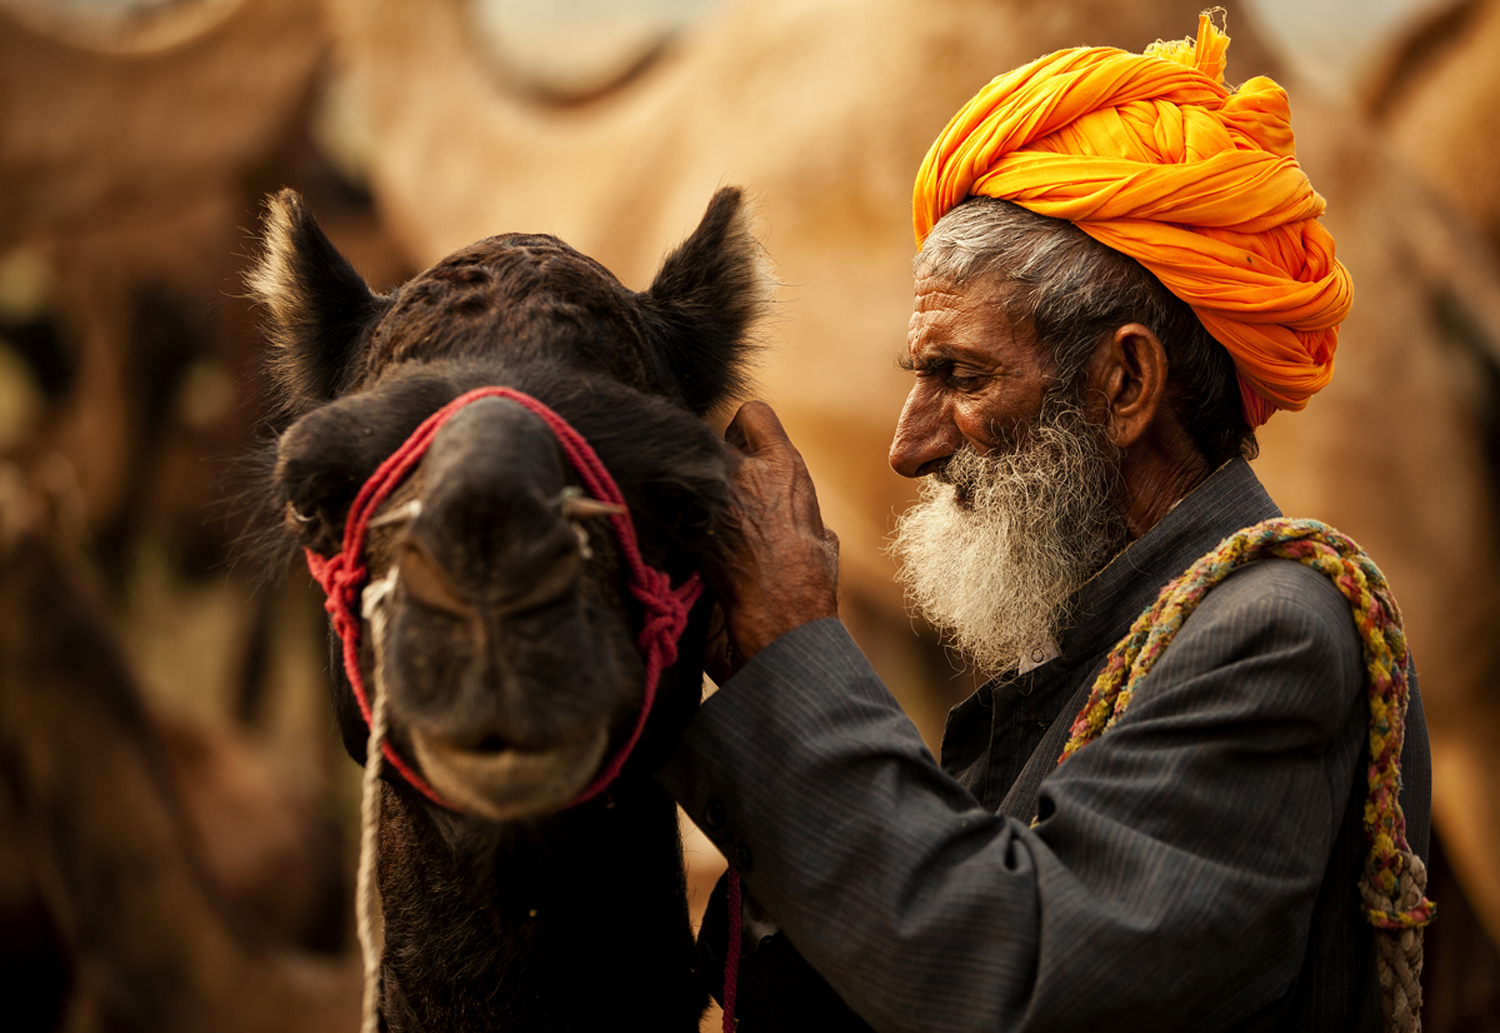 Historically, it was the Raika caste who managed camel breeding for Maharajas. They were once the only camel herders and breeders in the world who also protected them from slaughter.